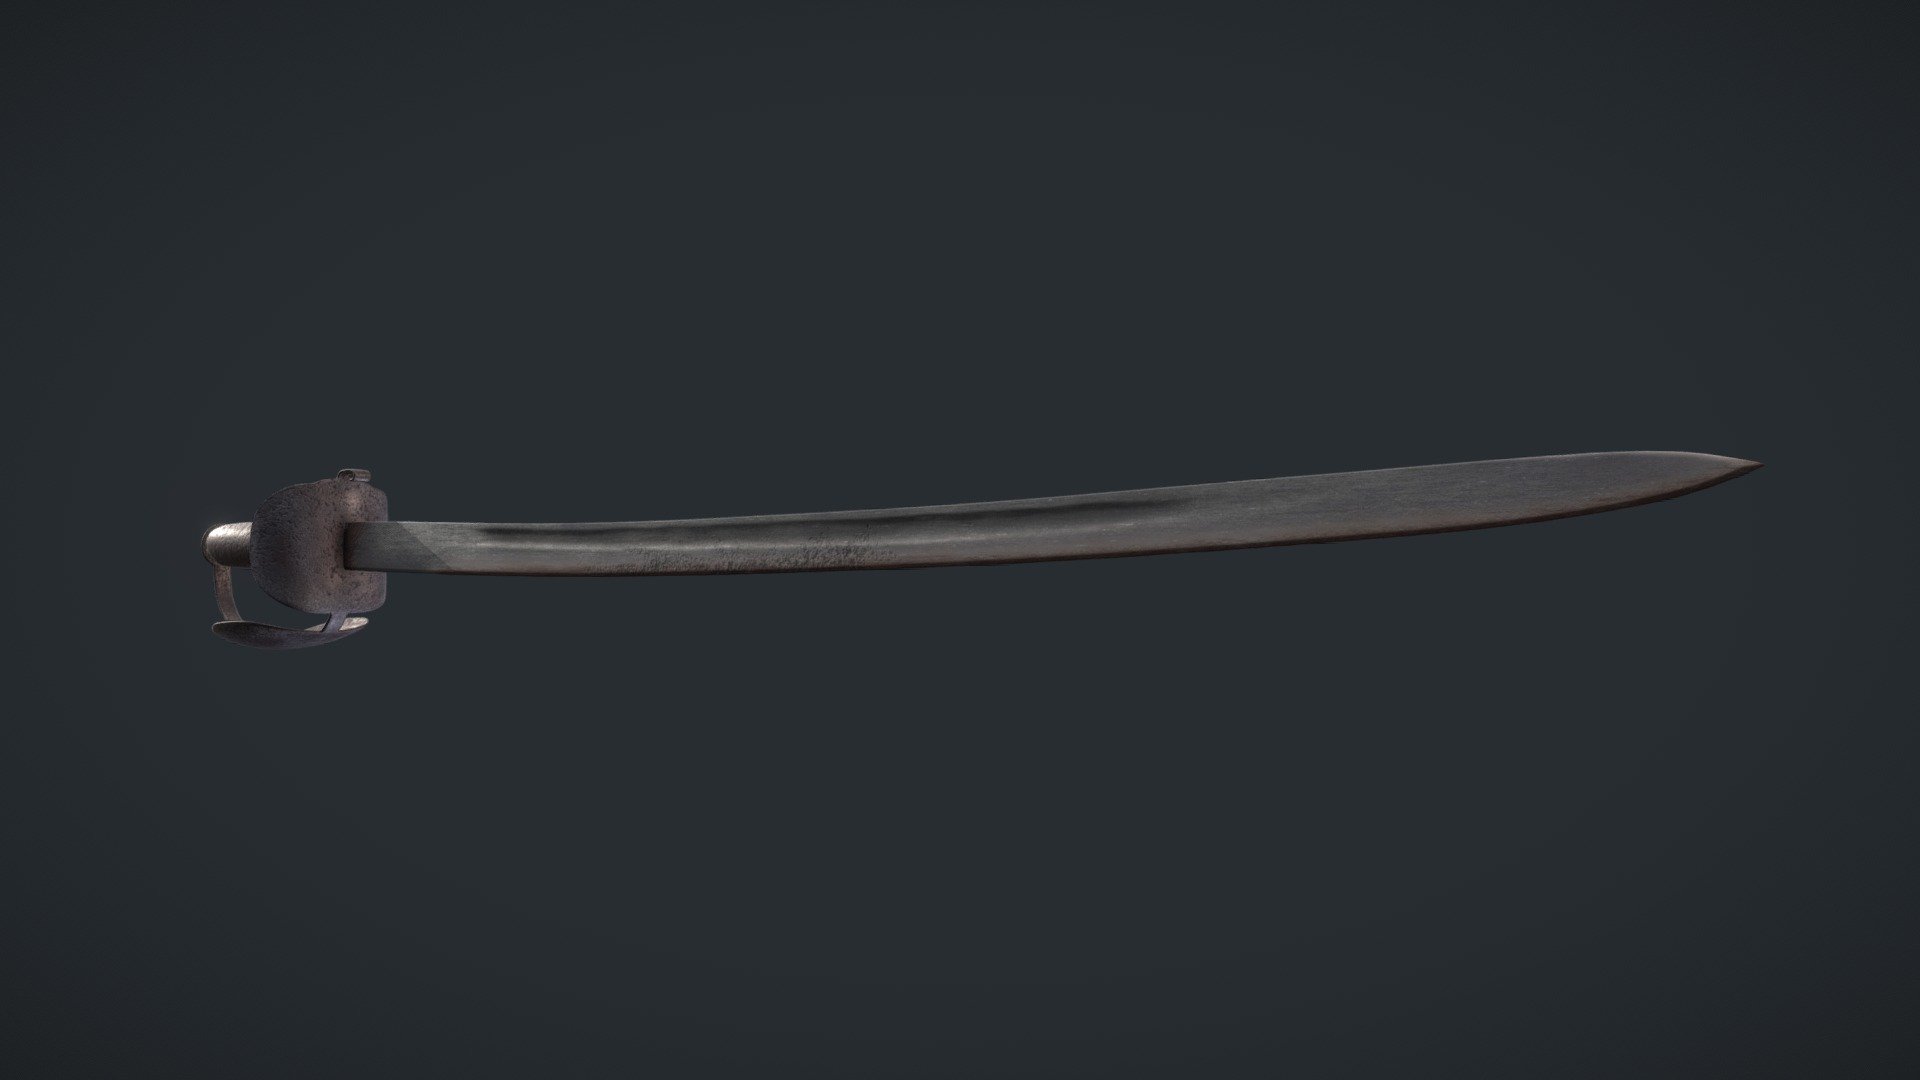 British Rusted Naval Cutlass 1726
Tris : 5816
Texture : 4096 x 1024
Beauty Shot : https://www.artstation.com/artwork/Ar3gKW
 My Artstation : https://www.artstation.com/schneider7

Contains : -5 Textures PNG (Albedo, Normal, Metal, Roughness and Ambient Occlusion)
                   -FBX - British Rusted Naval Cutlass 1726 - Buy Royalty Free 3D model by S-ROBB 3d model